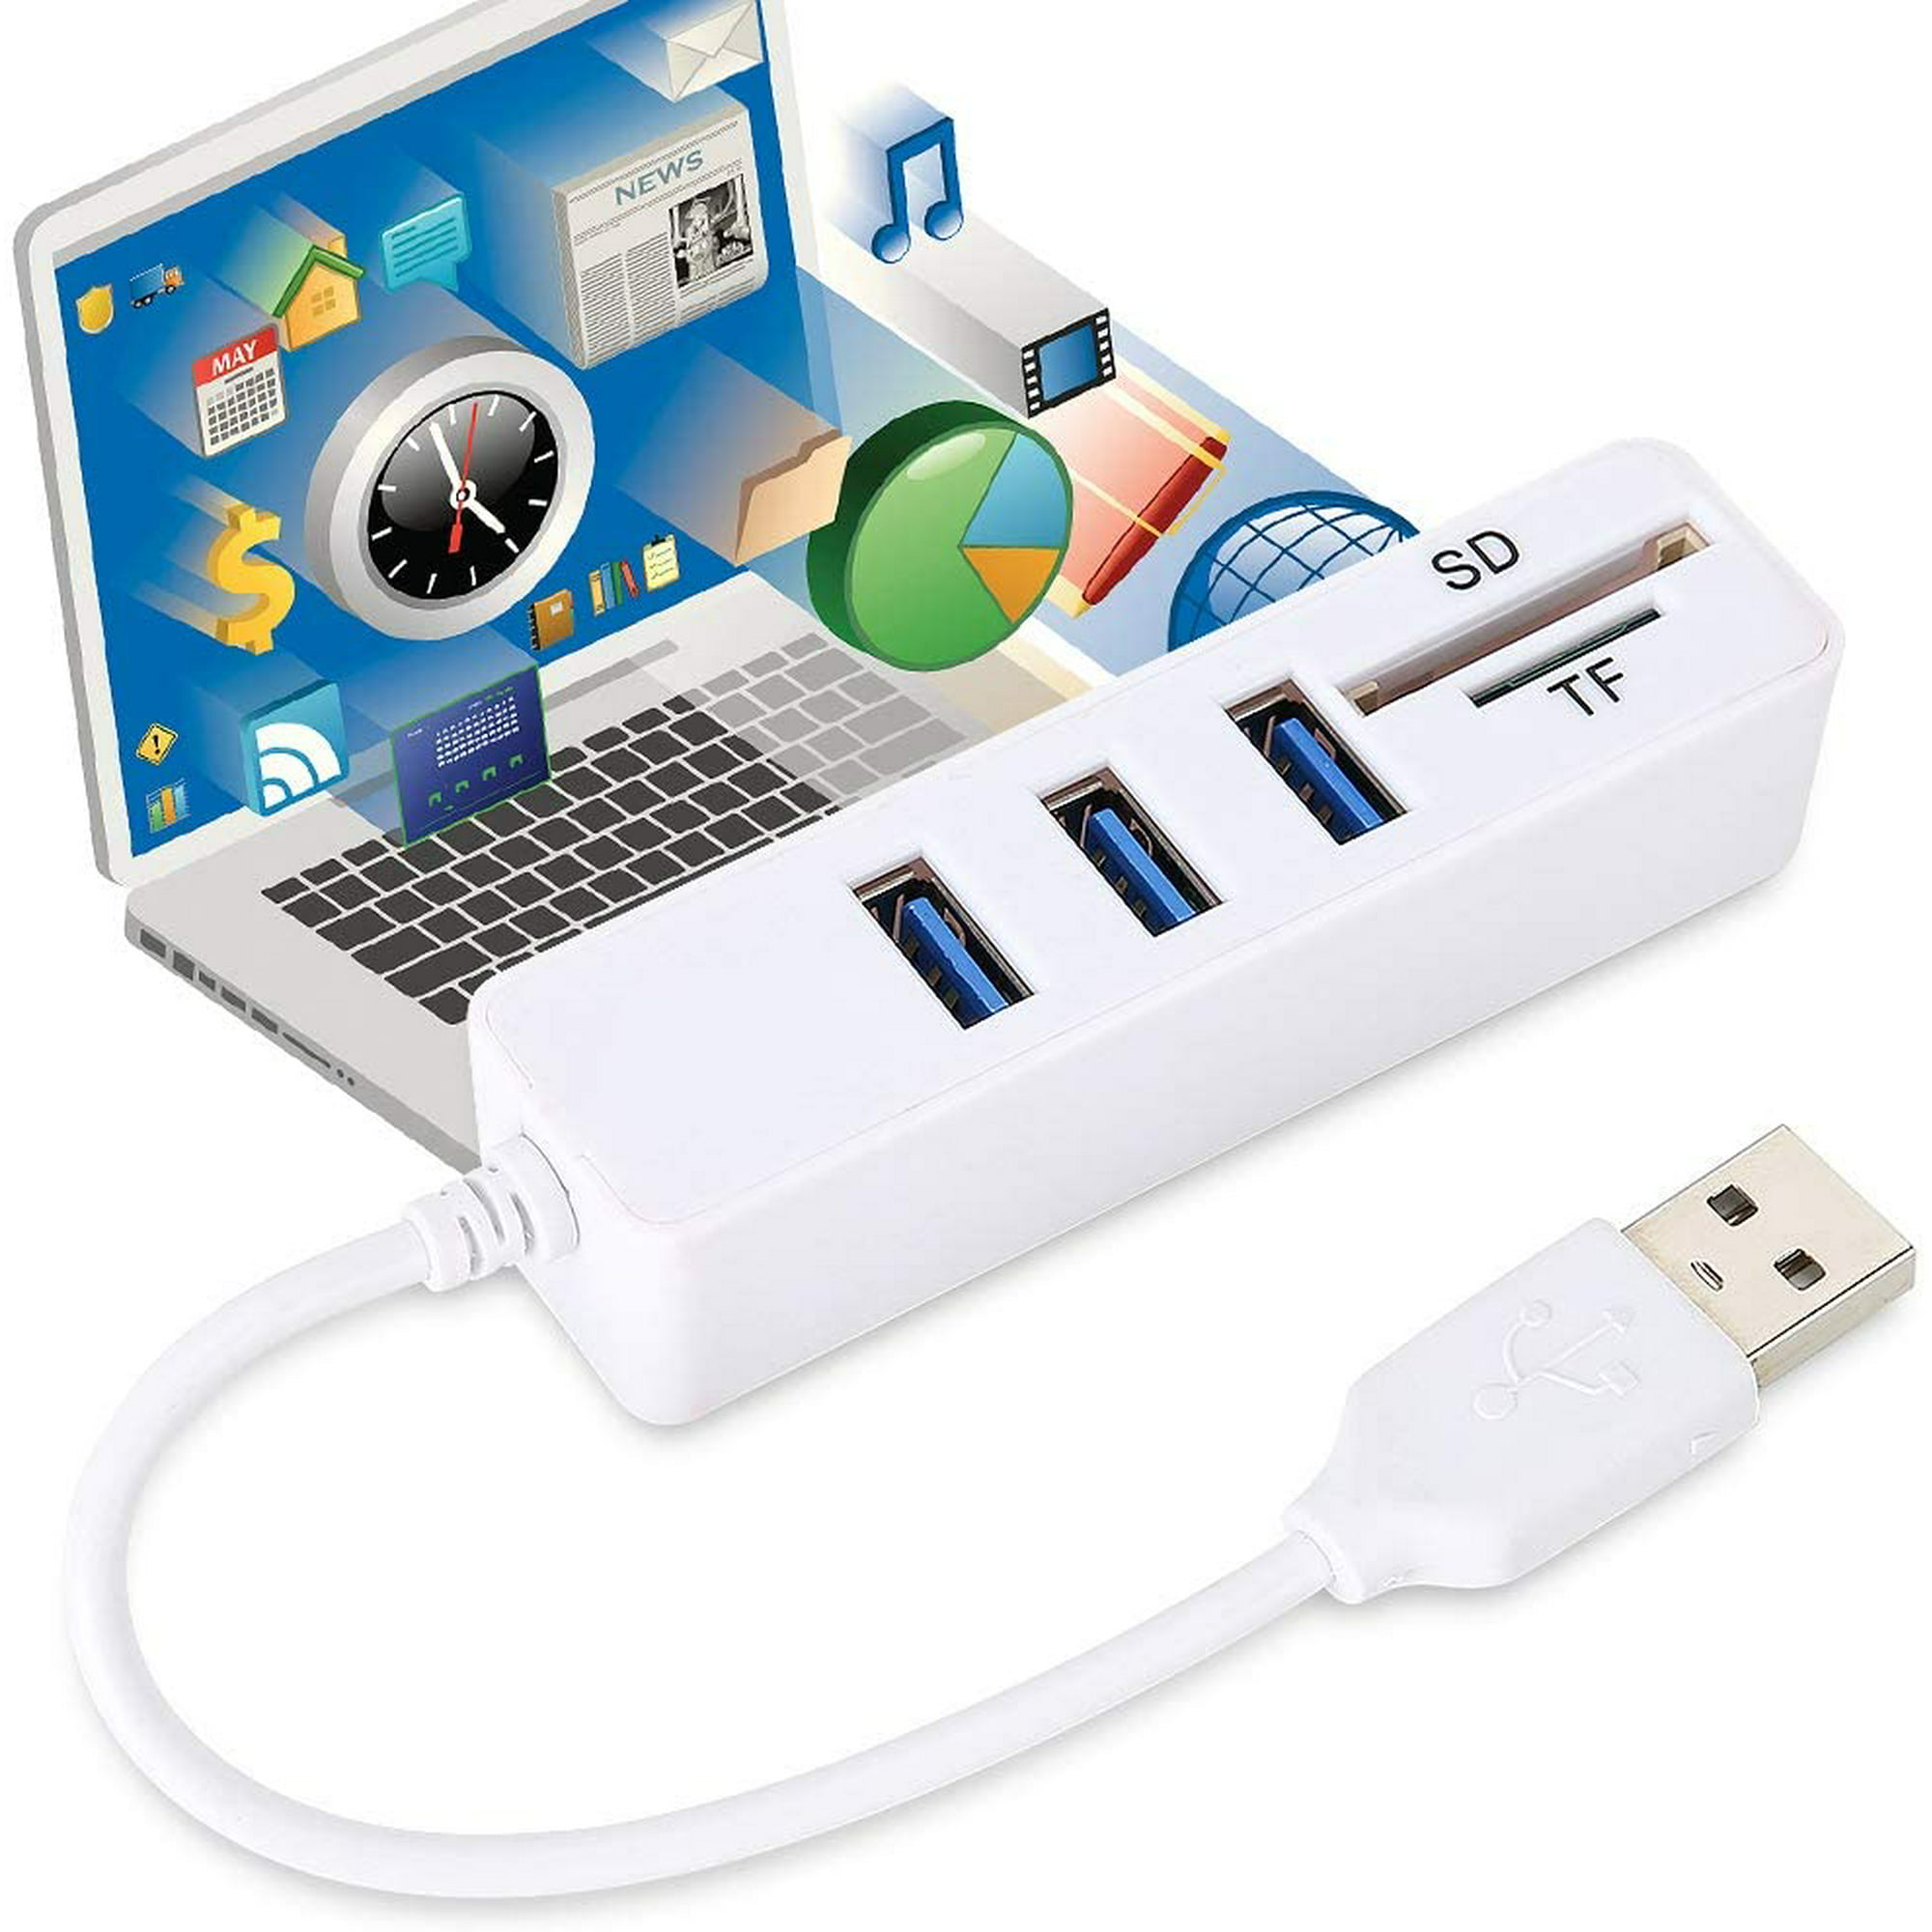 Portable USB Hub for XP/for Mac 7/8/ Vista etc Support for Micro SD/T‑Flash SD/SDHC/SDXC Reader 480Mbps High Speed Splitter with 3 USB2.0 Port and SD TF Port 